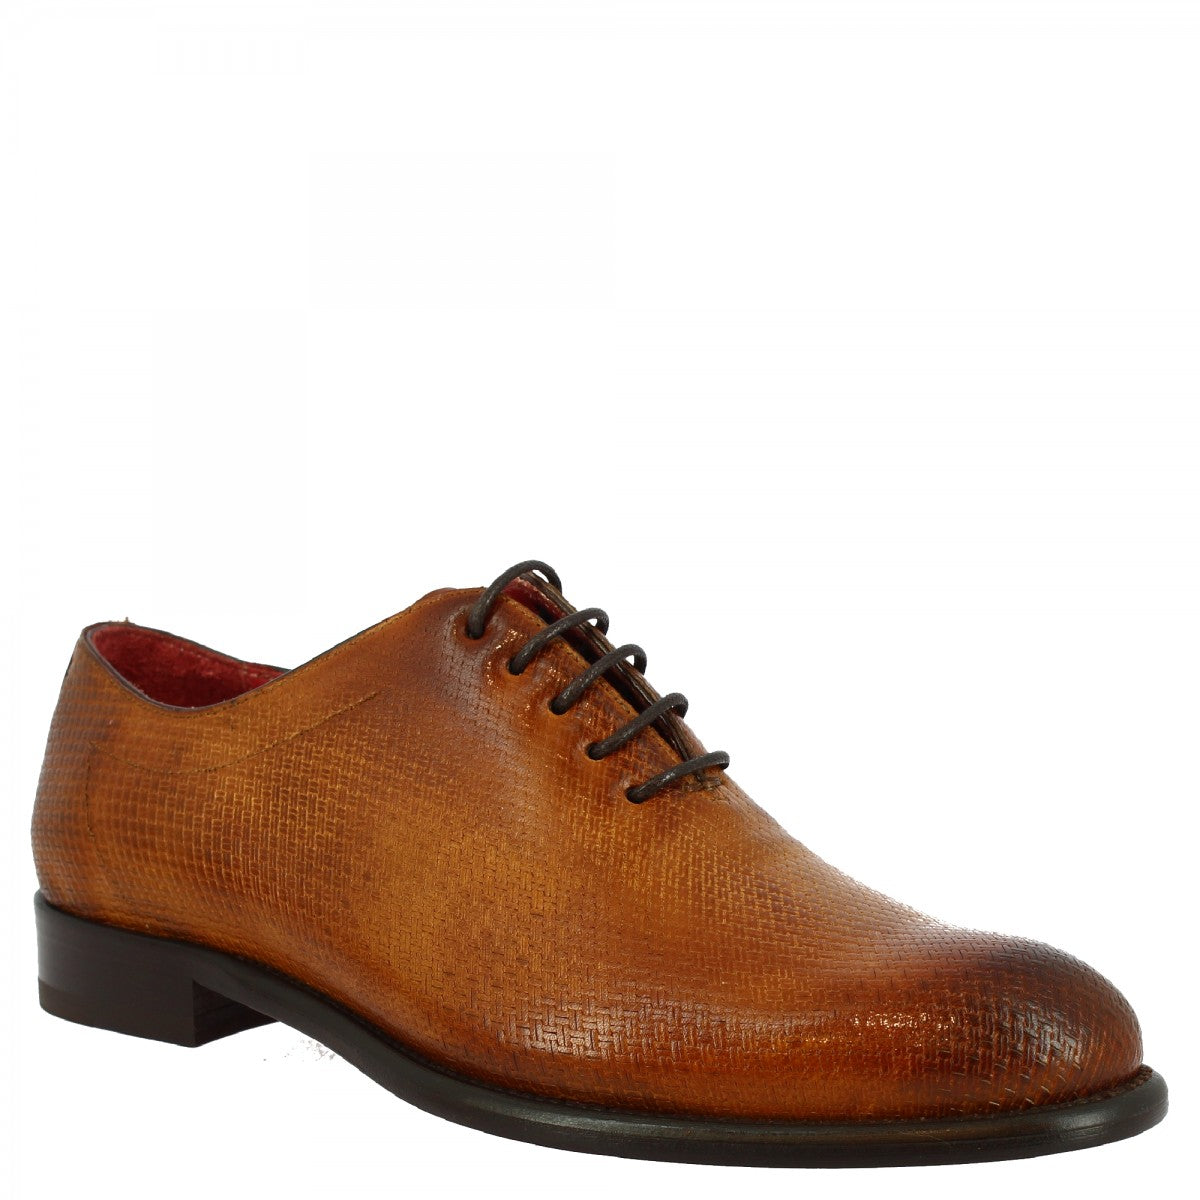 Men's brogues shoes with rounded toe handmade in Siena Montecarlo calf leather